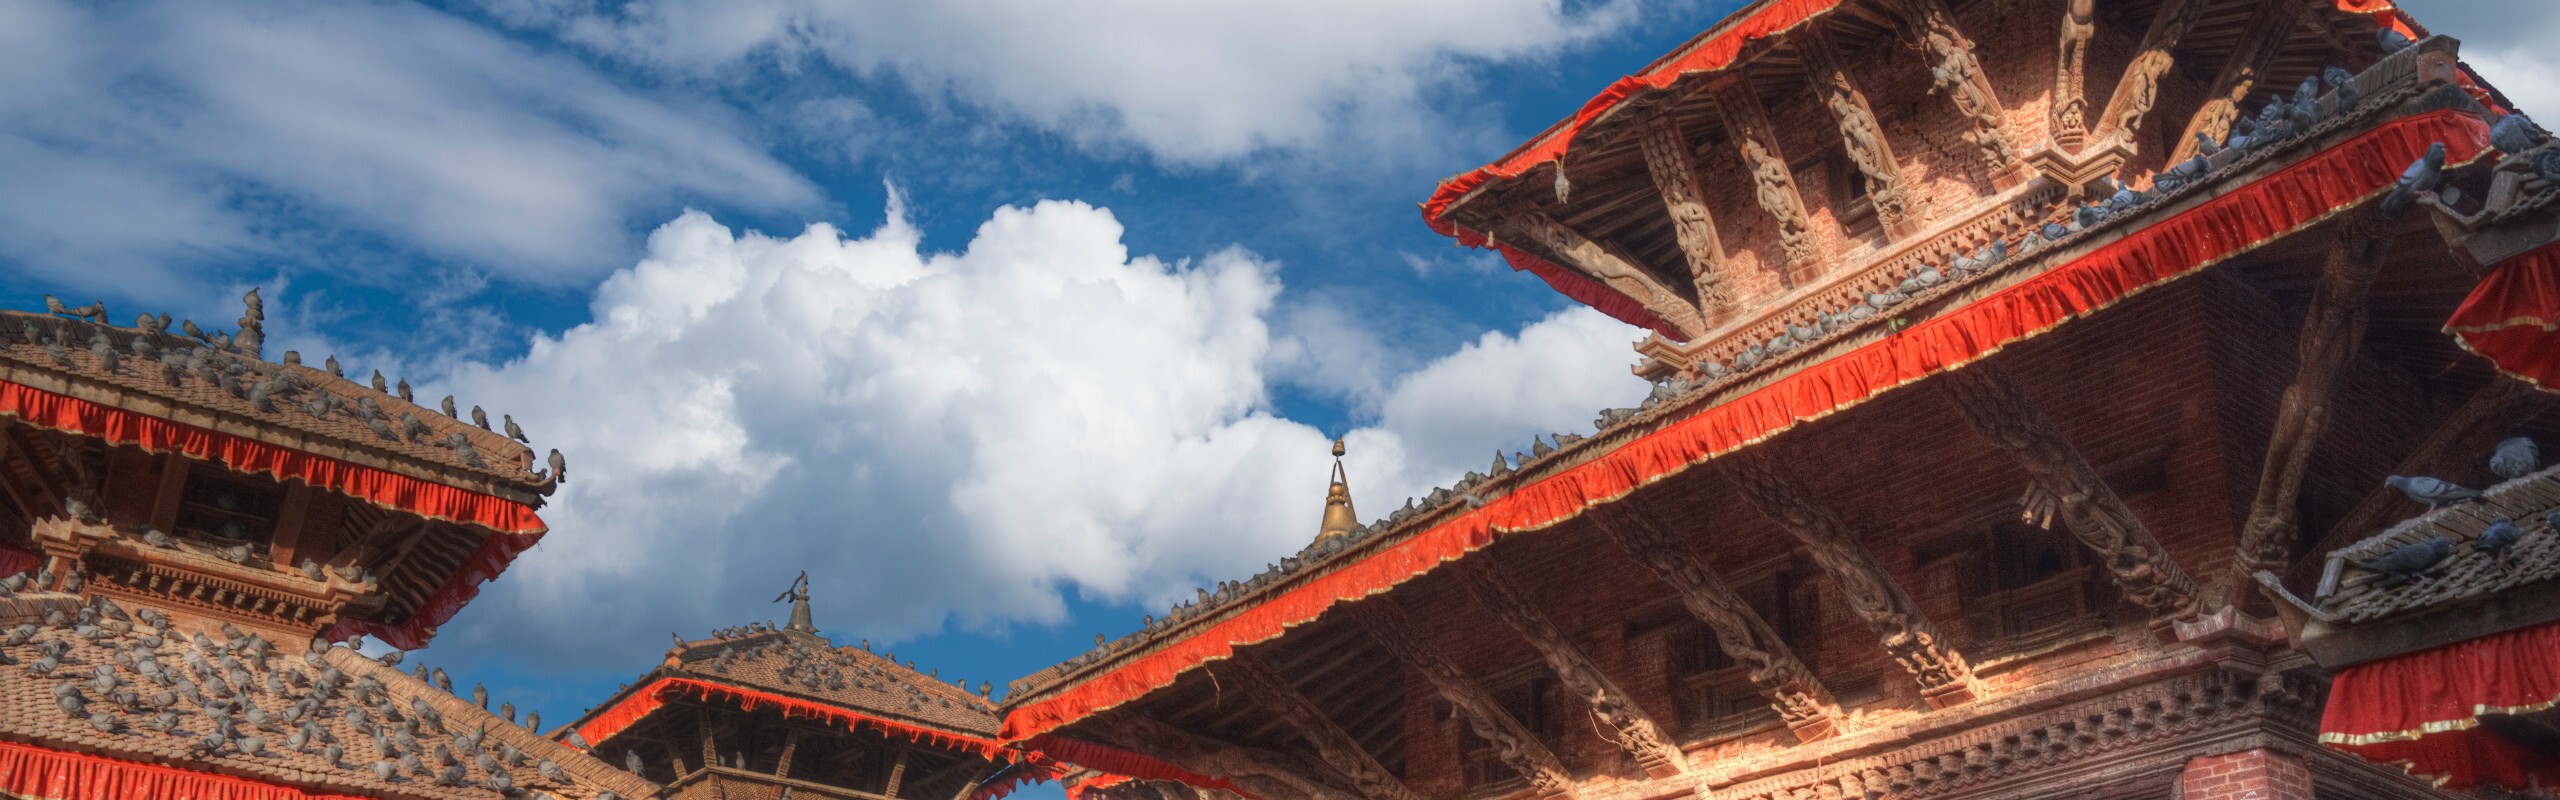 Top 10 Places to Visit in Nepal and What to Do